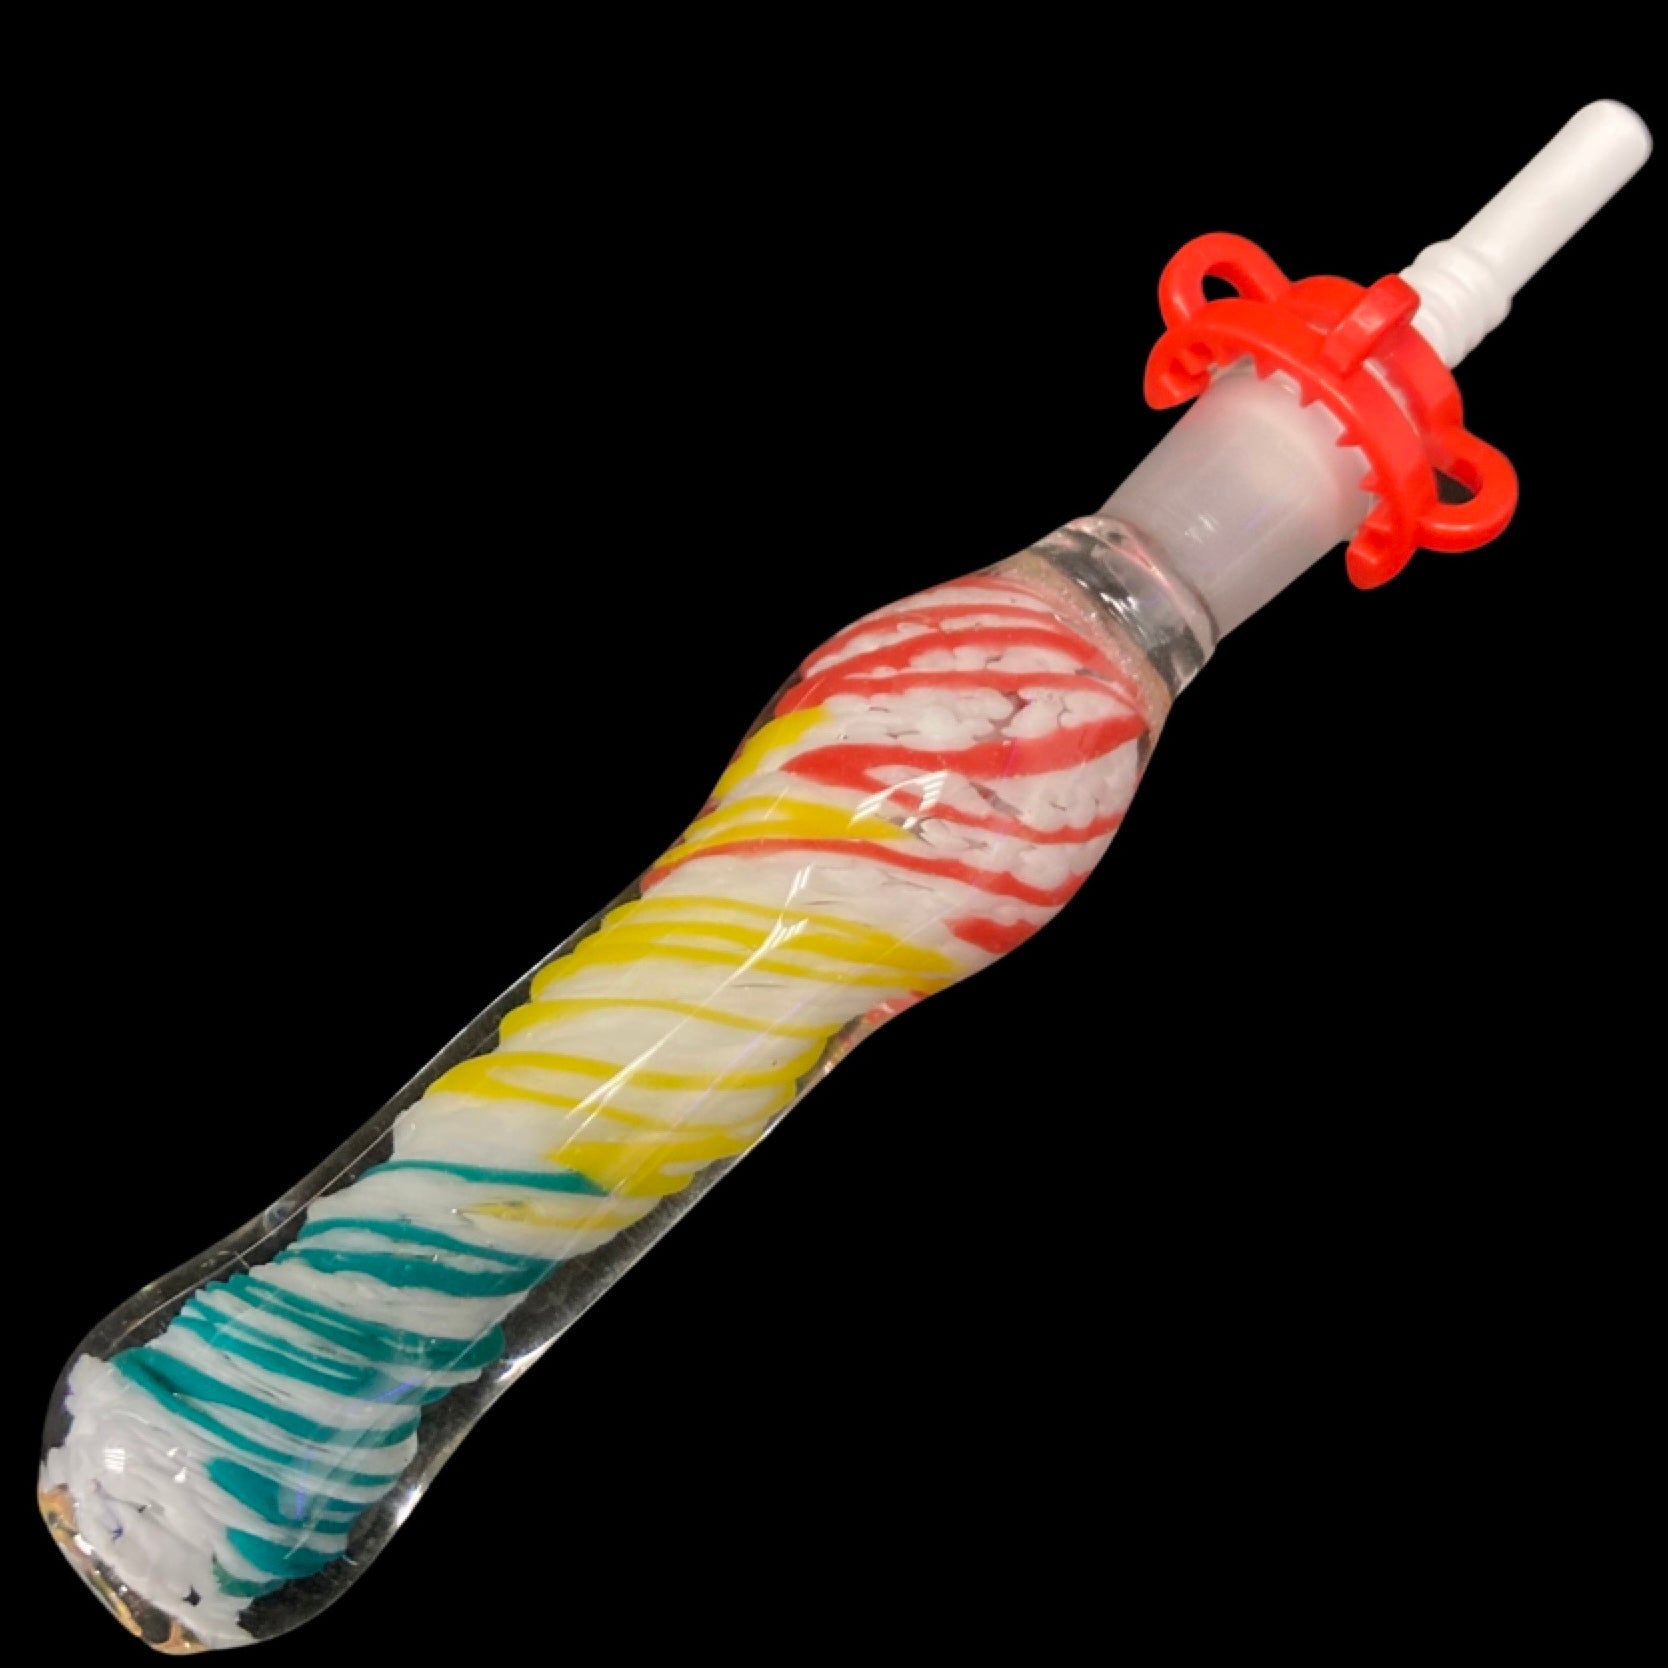 Ceramic Tip Nectar Collector – High Times Supply